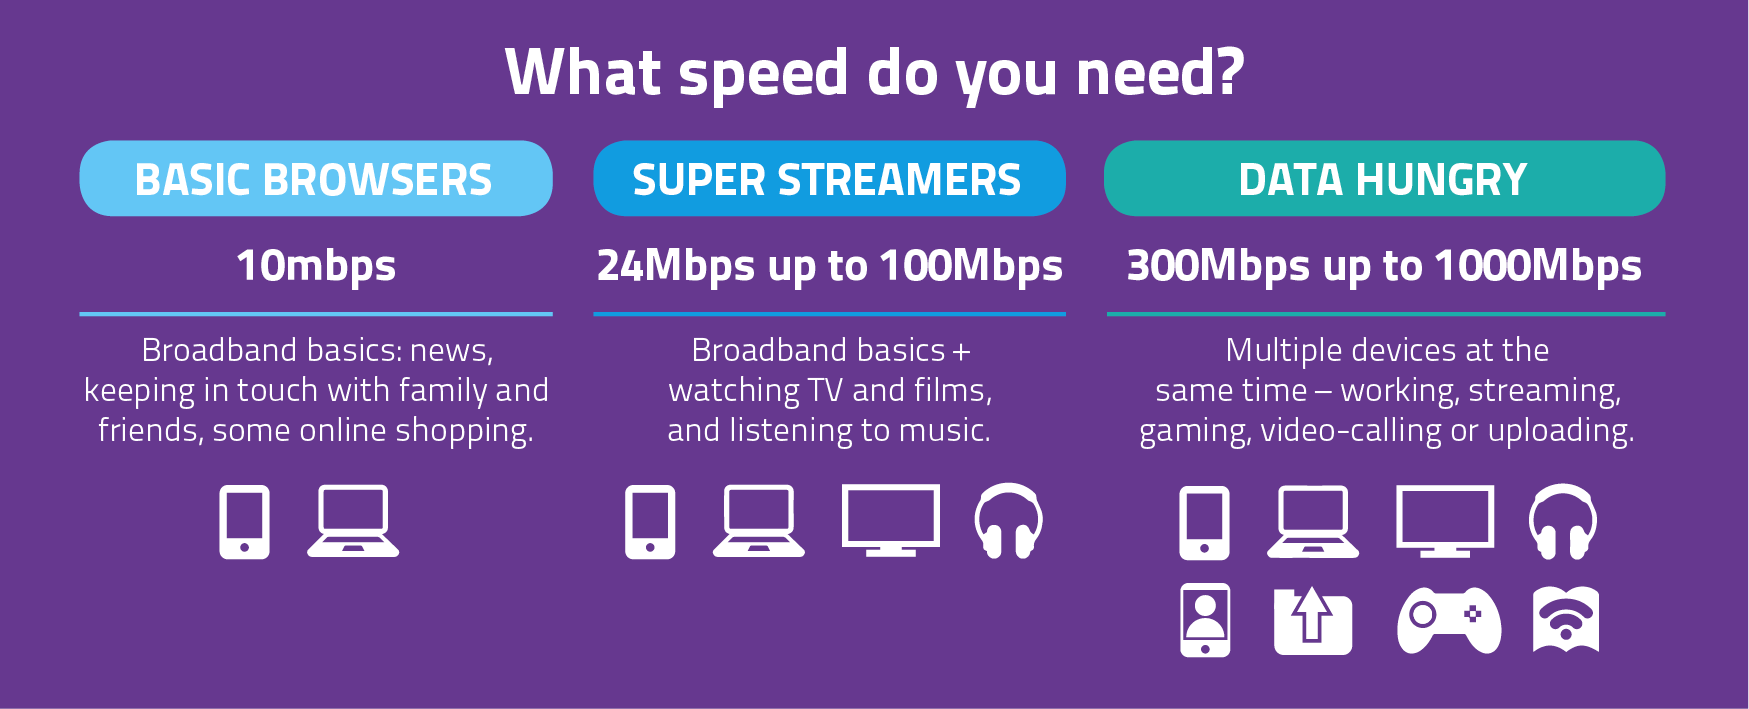 What speed do you need? Standard 10mbps. Super streamers from 24mbps to 100Mbps. Gigabit up to 1000mbps